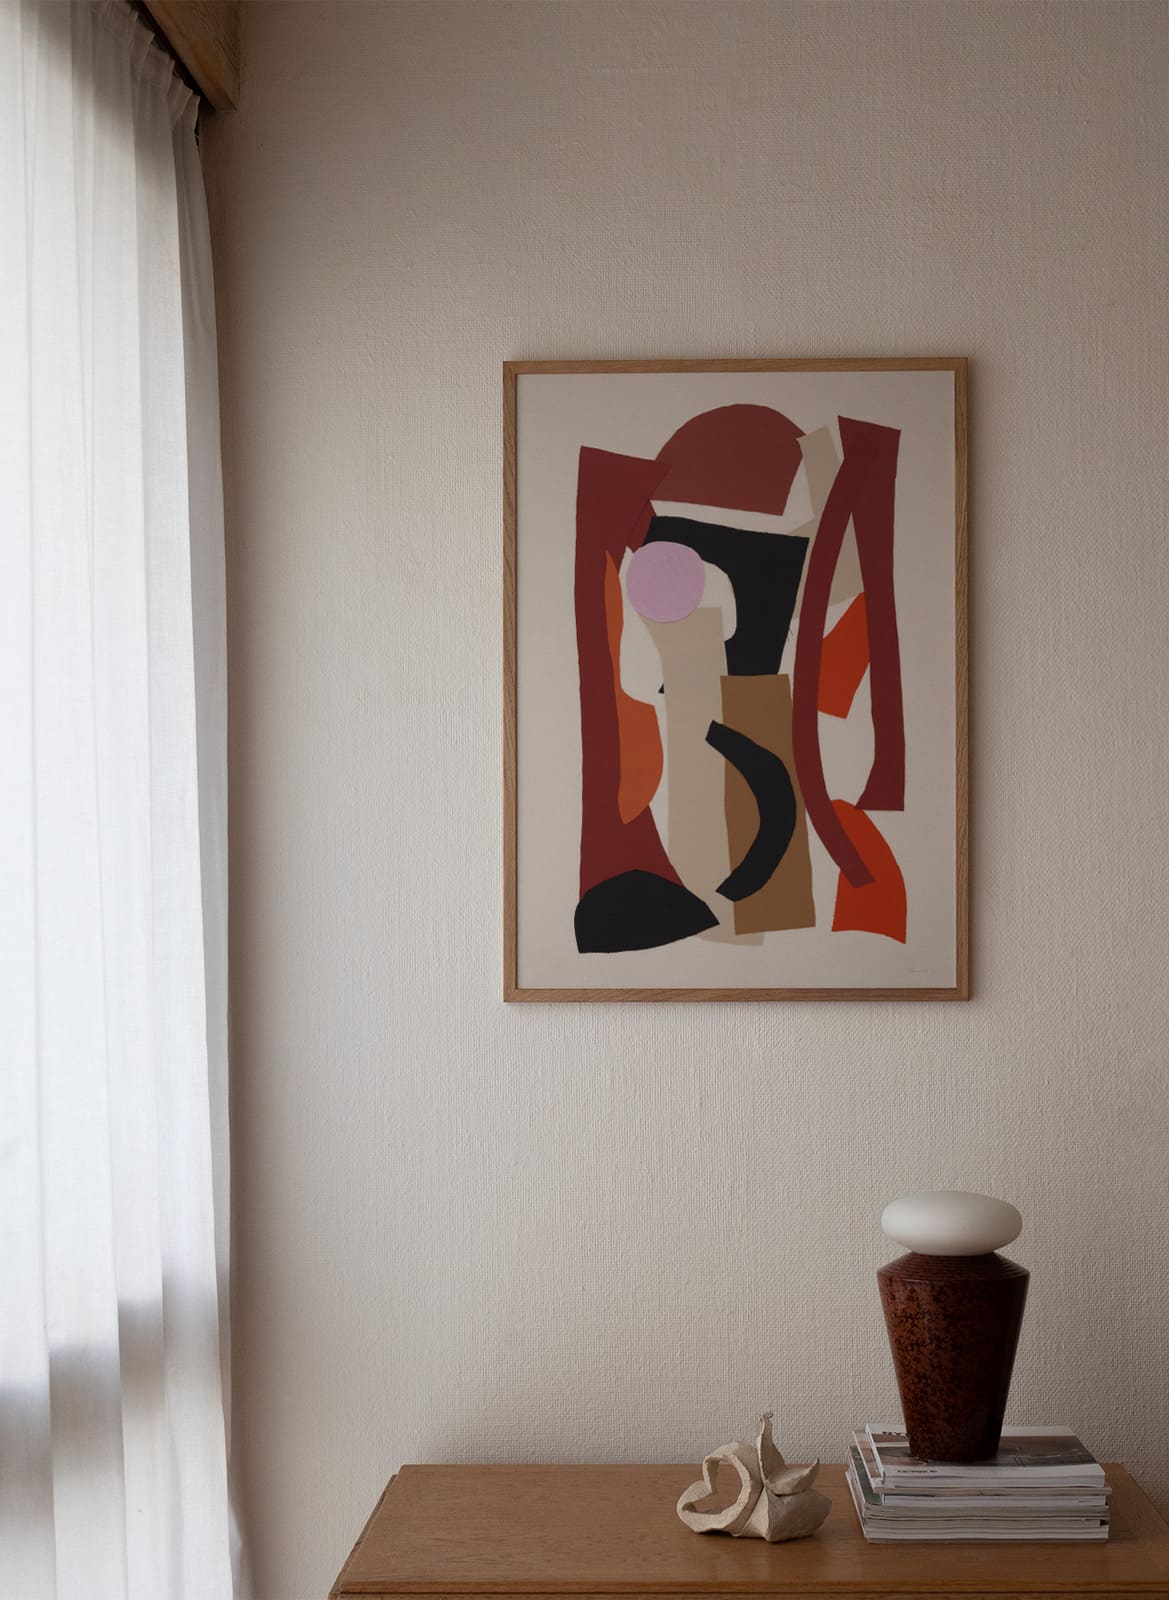  Framed colorful poster hanging in a living room by Atelier Cph